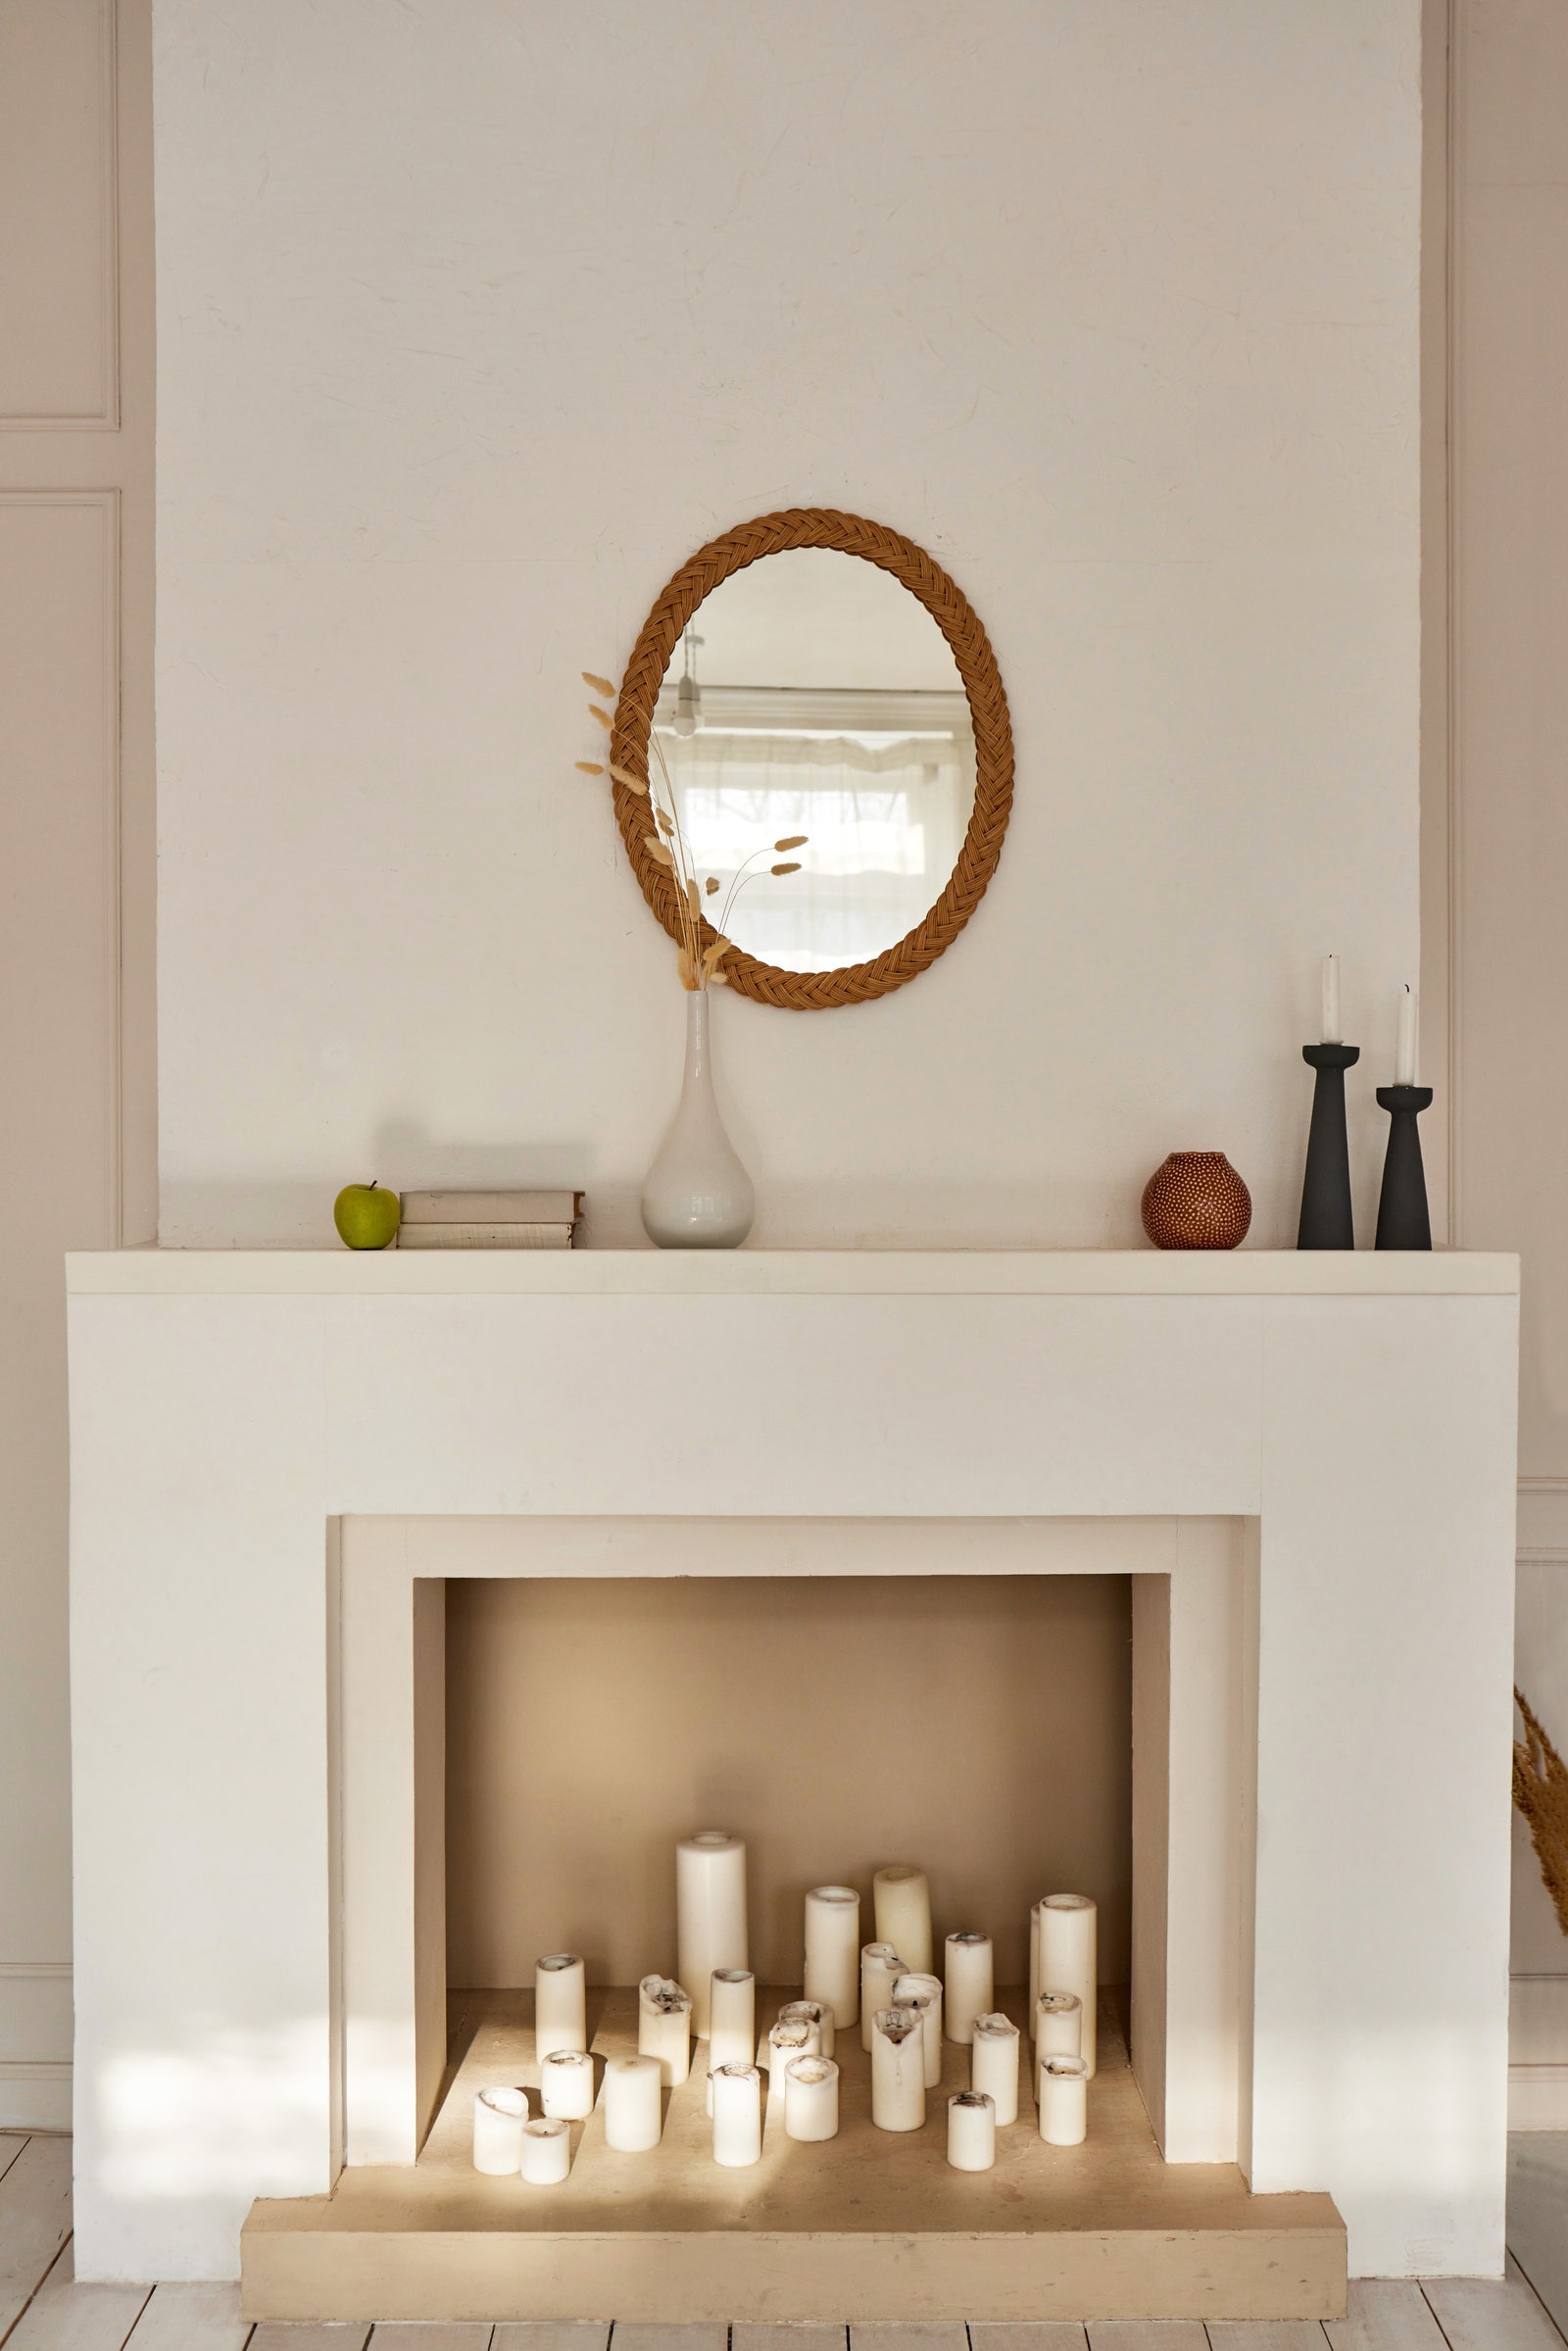 These slick ceramics give the mantelpiece an artistic flair and allow for the perfect display of seasonal flora for a...